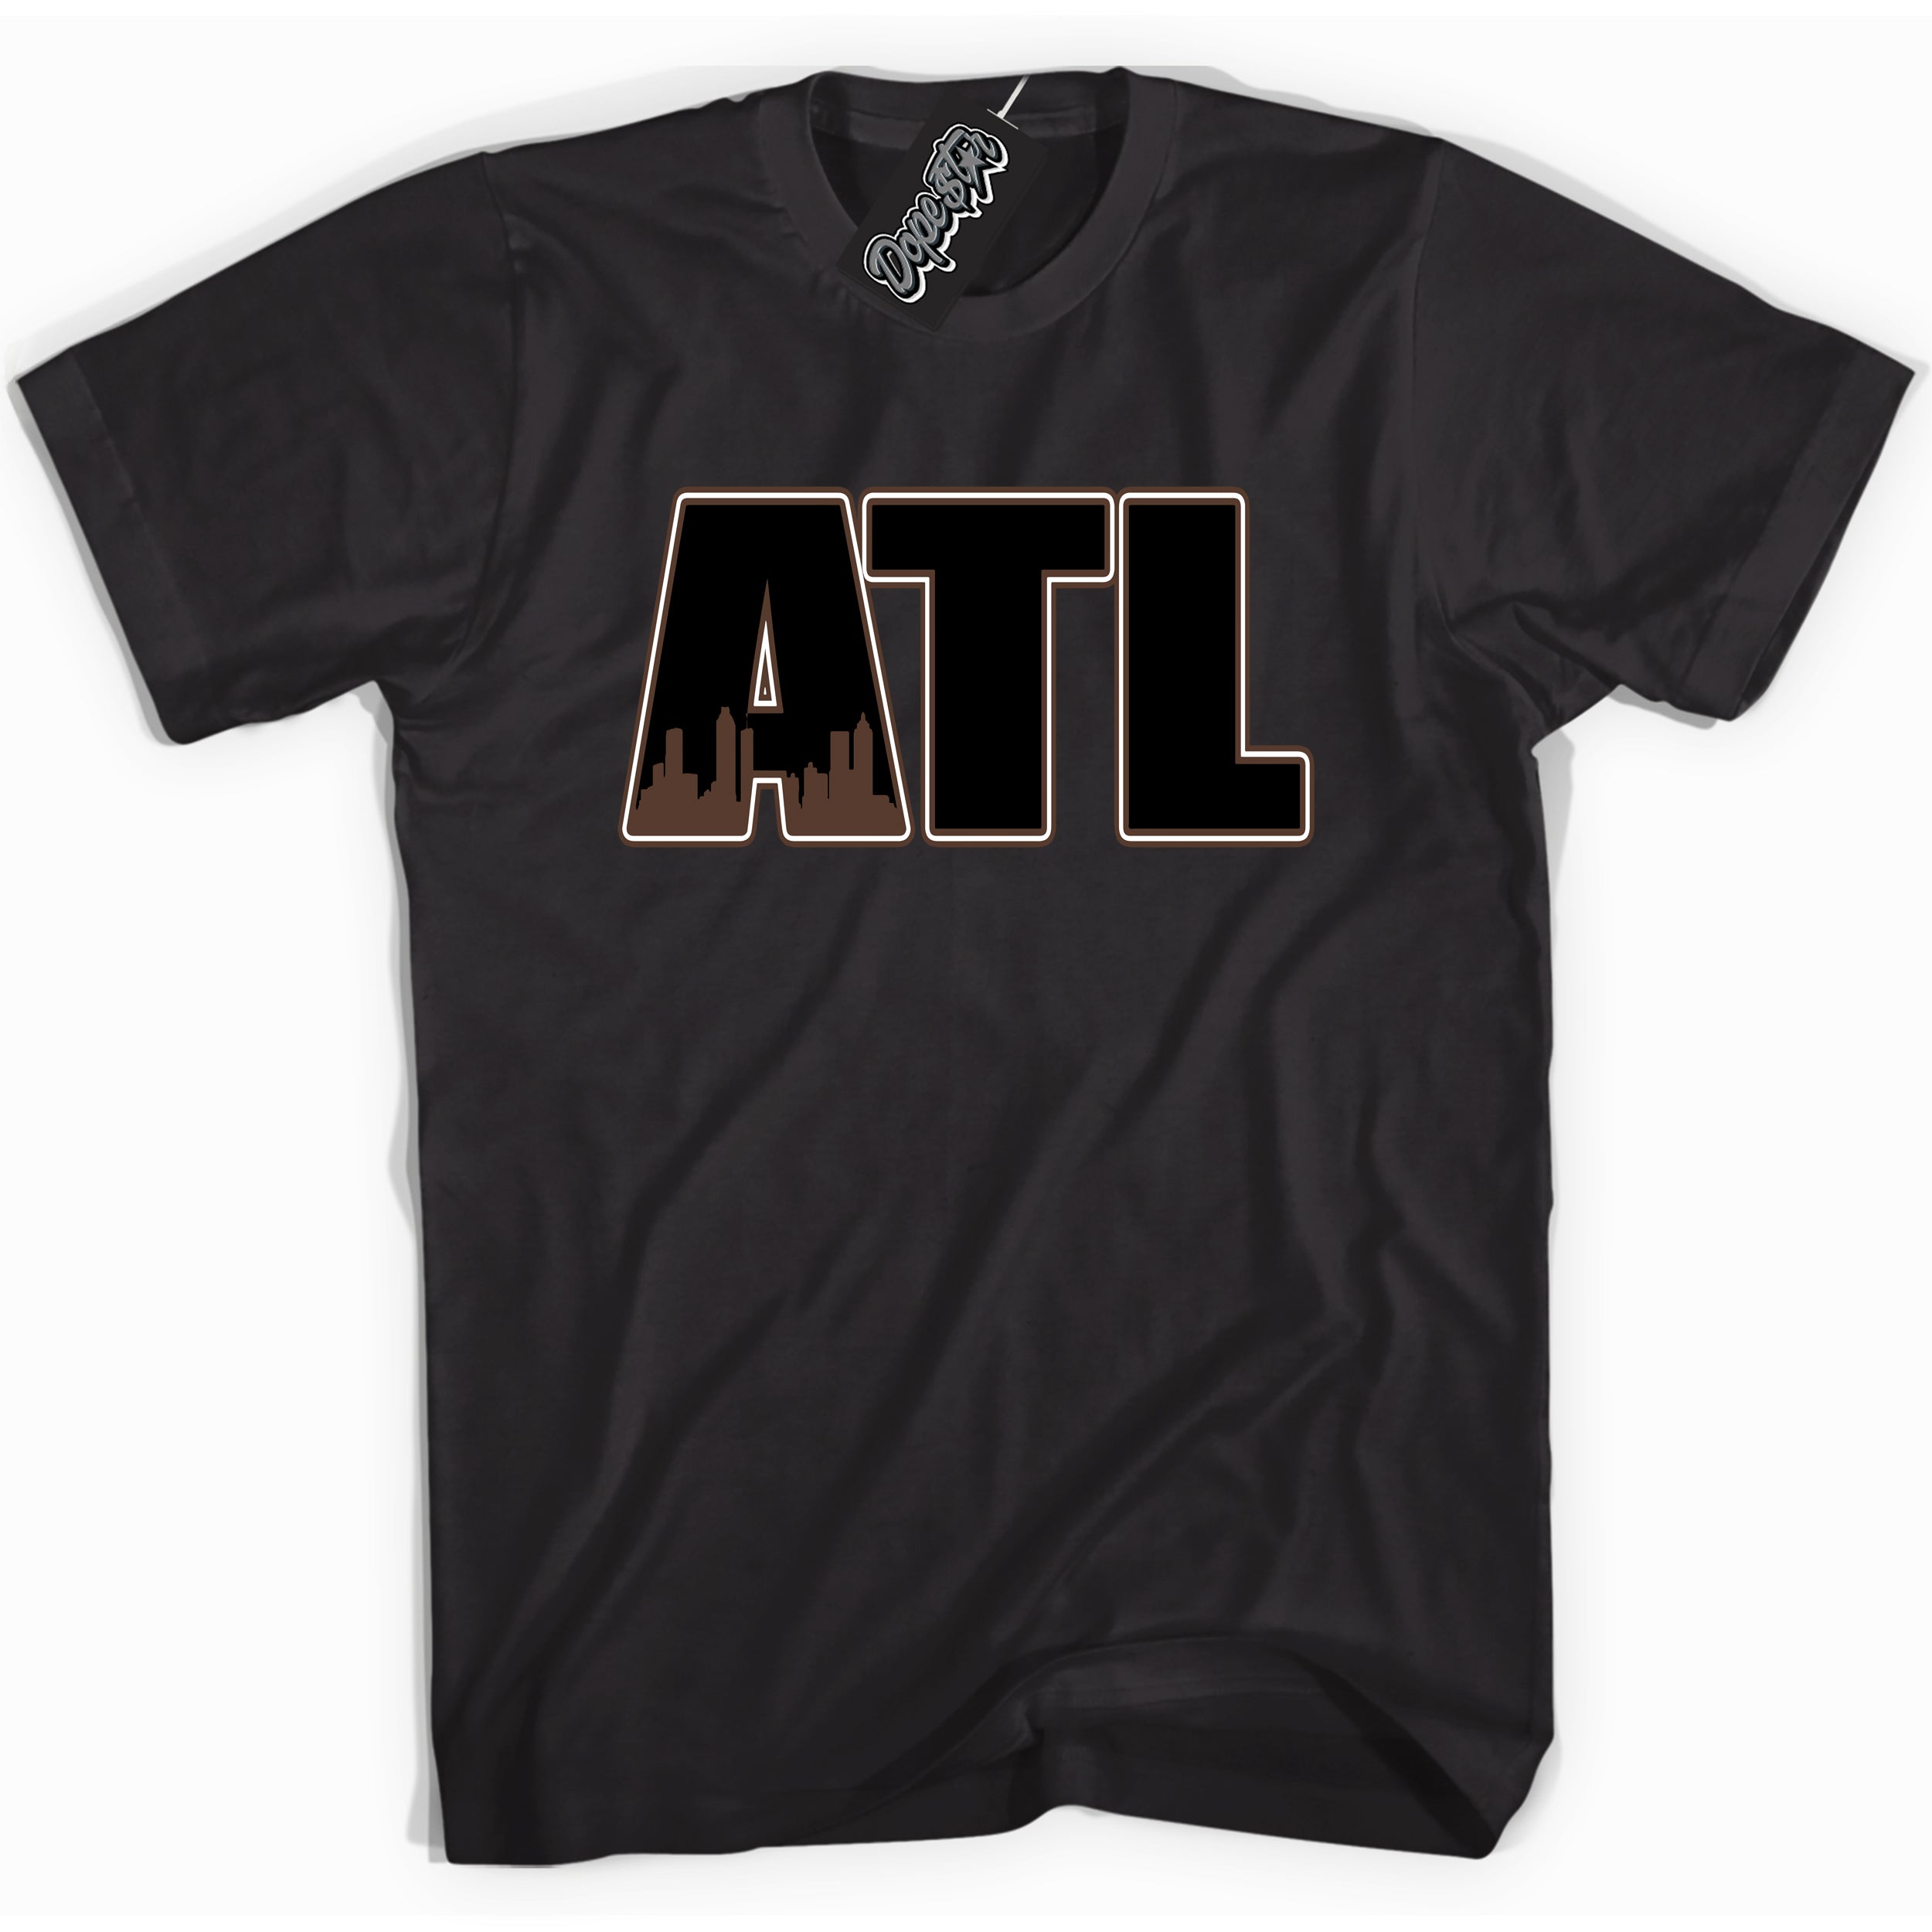 Cool Black graphic tee with “ Atlanta ” design, that perfectly matches Palomino 1s sneakers 